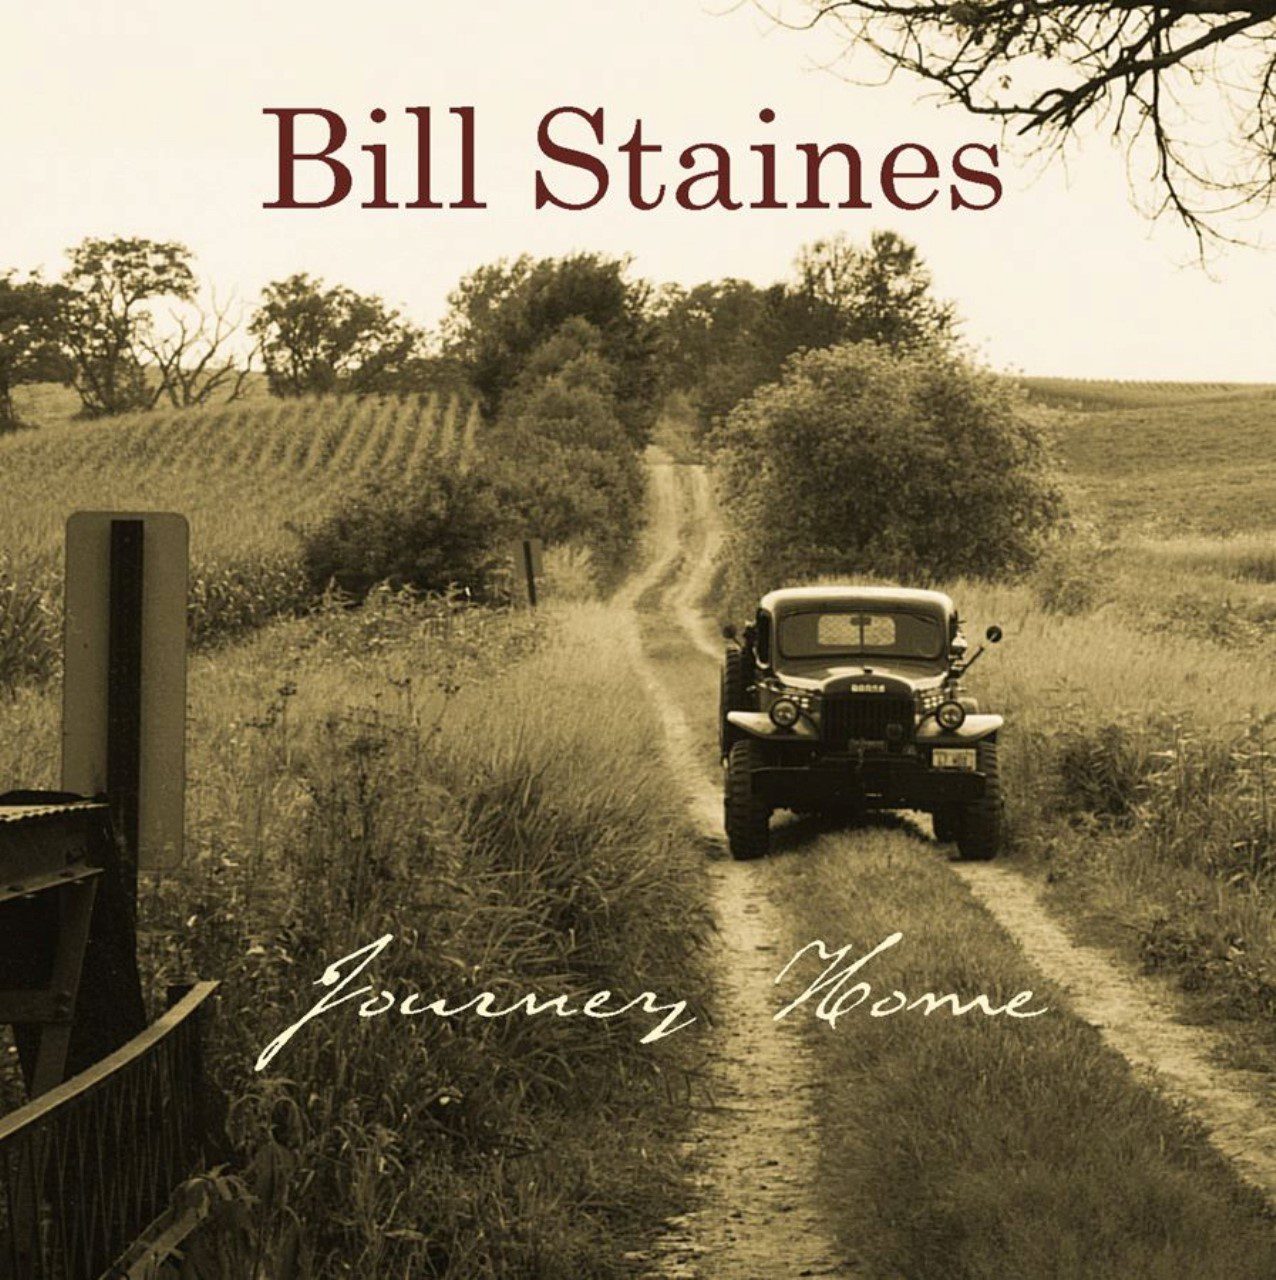 Bill Staines - Journey Home cover album